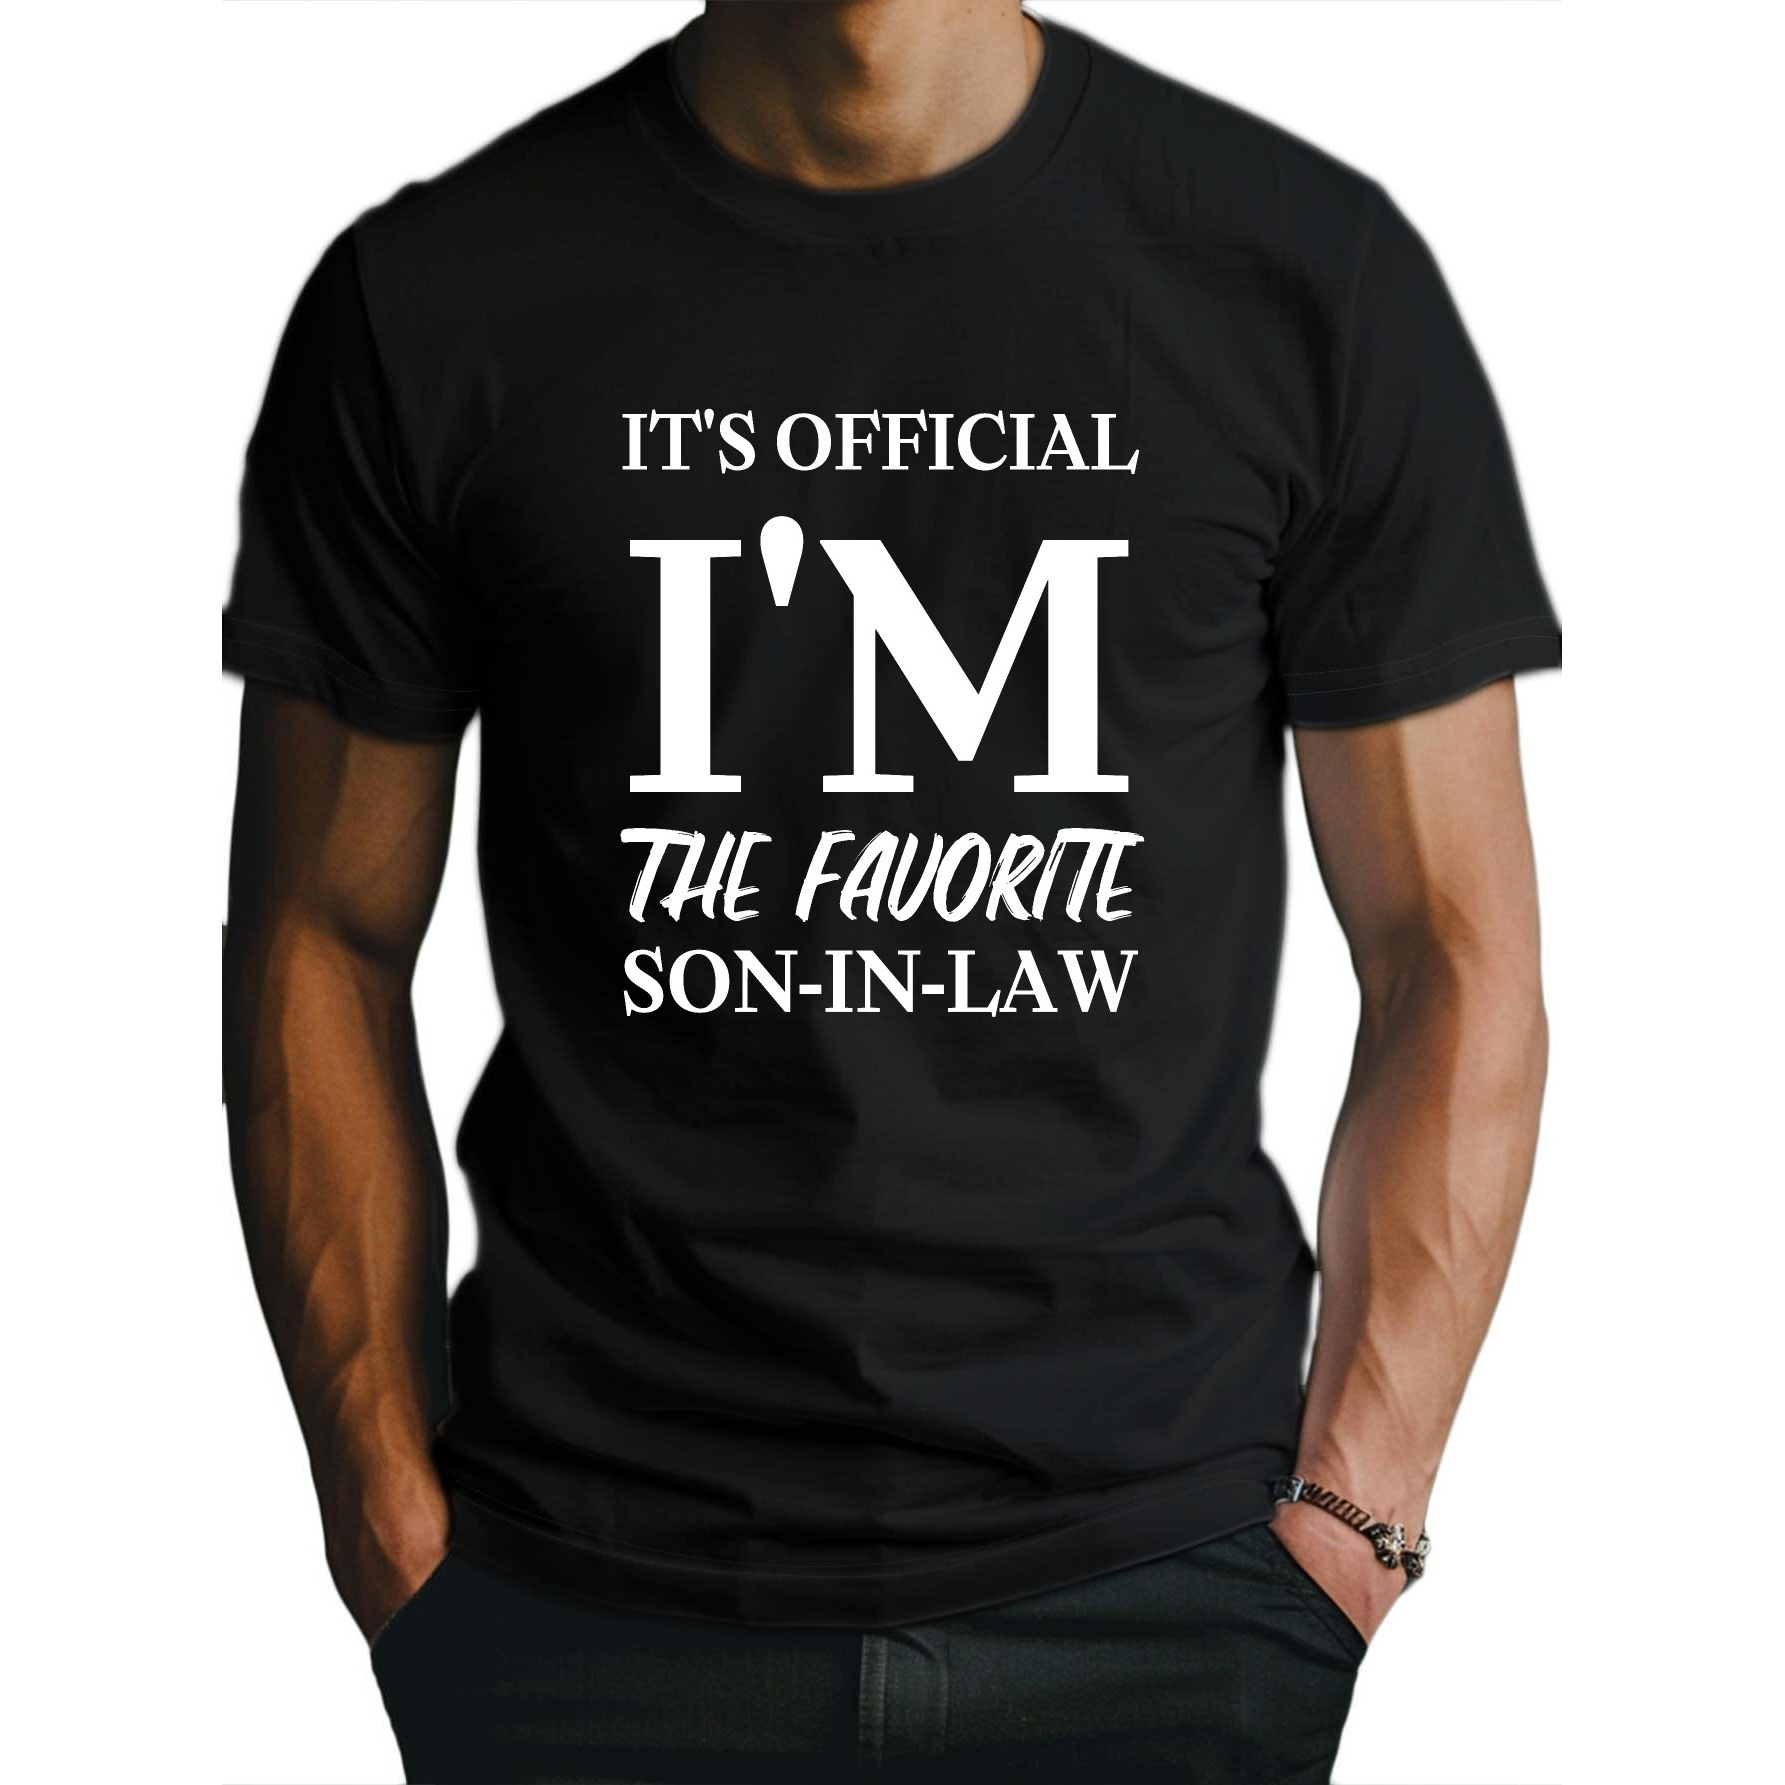 

It's Official I'm The Favorite Son-in-law Print Crew Neck And Short Sleeve T-shirt, Pure Cotton Stylish Summer Tops For Men's Casual And Outdoors Wear